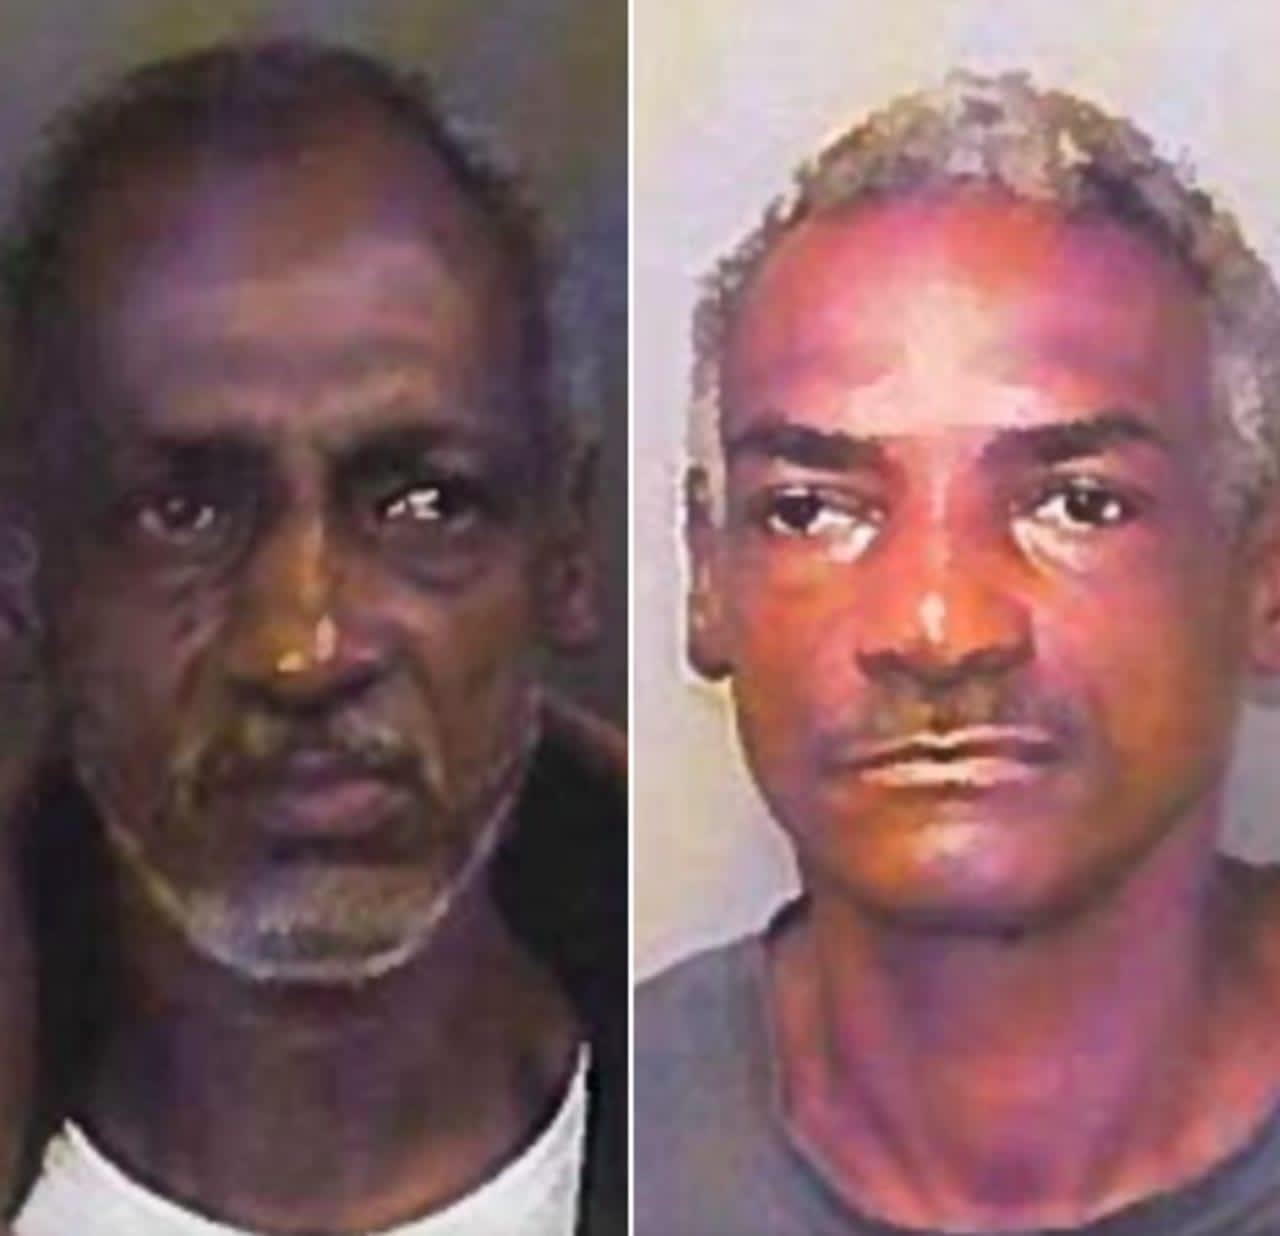 Virgil Green 55, and Darryl Green, 52, are each facing a charge of burglary for the Nov. 17 incident.